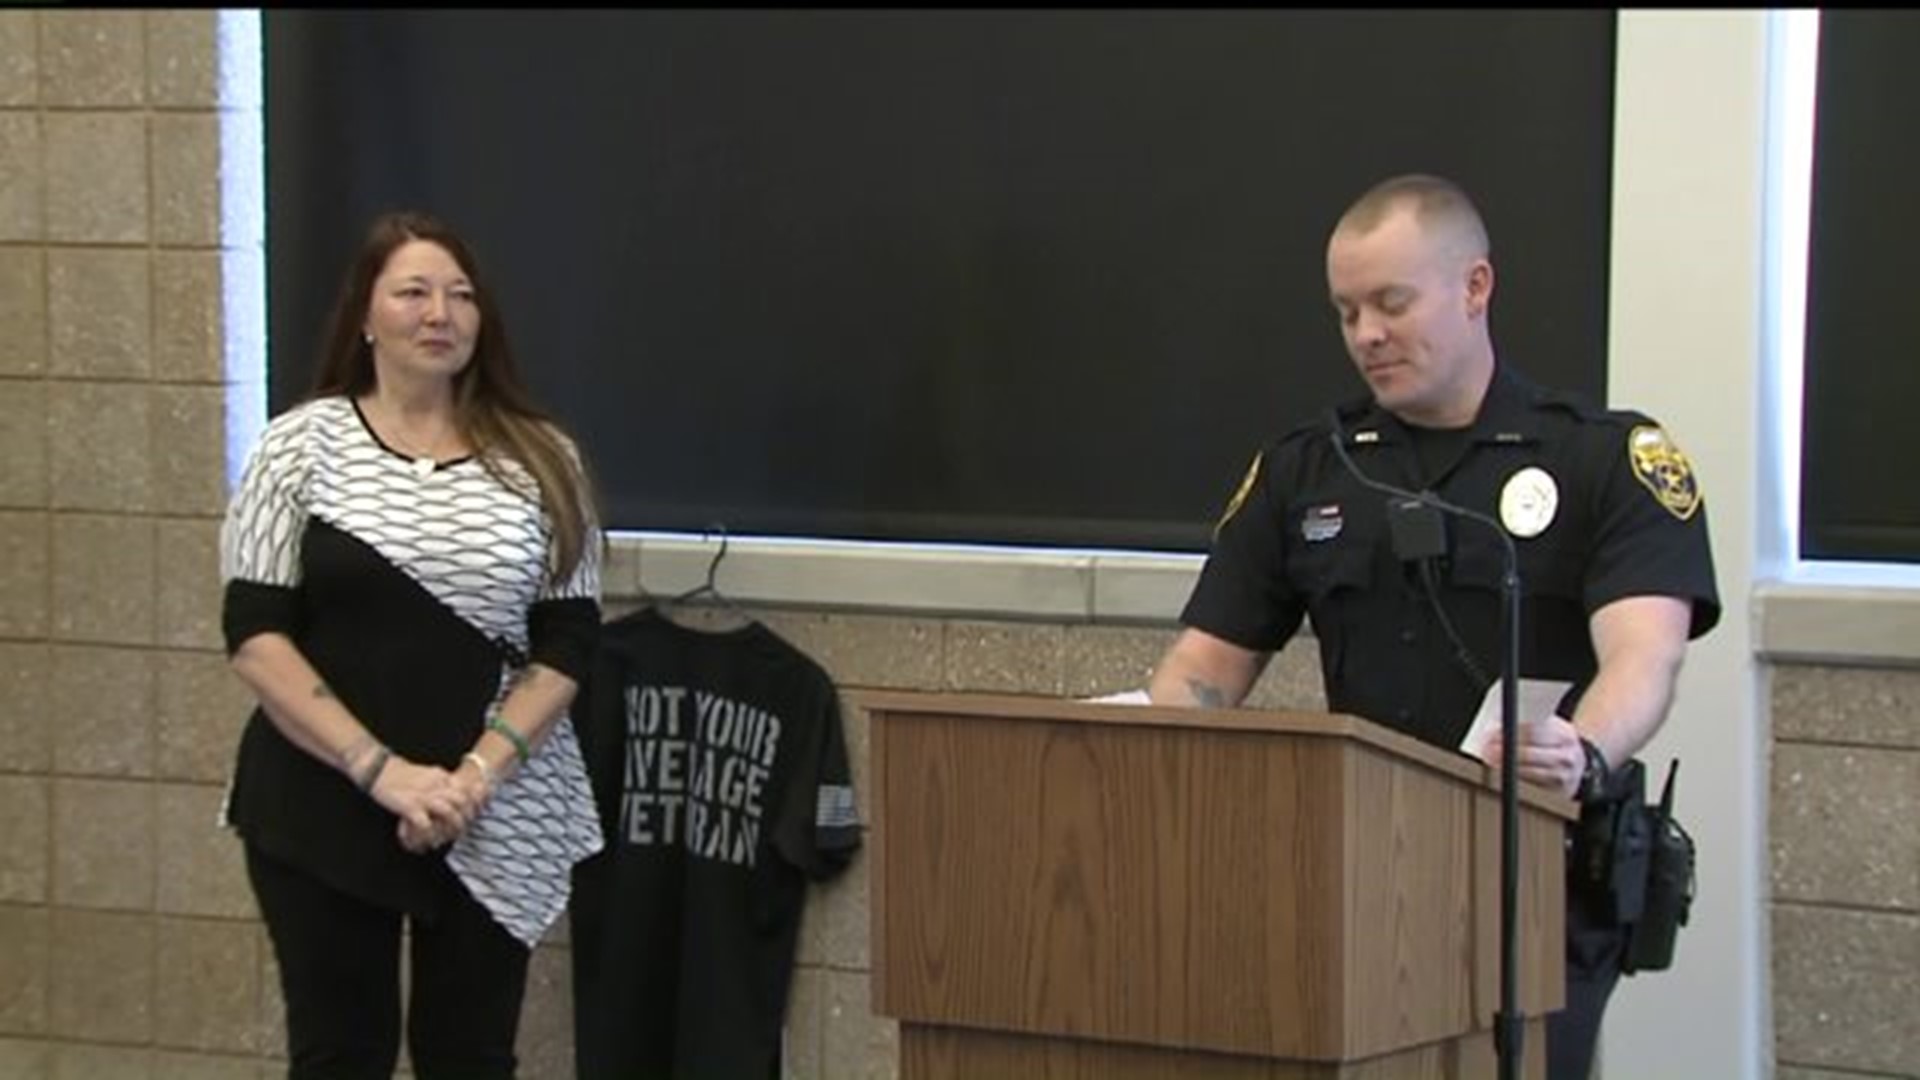 Moline police officer honored for service